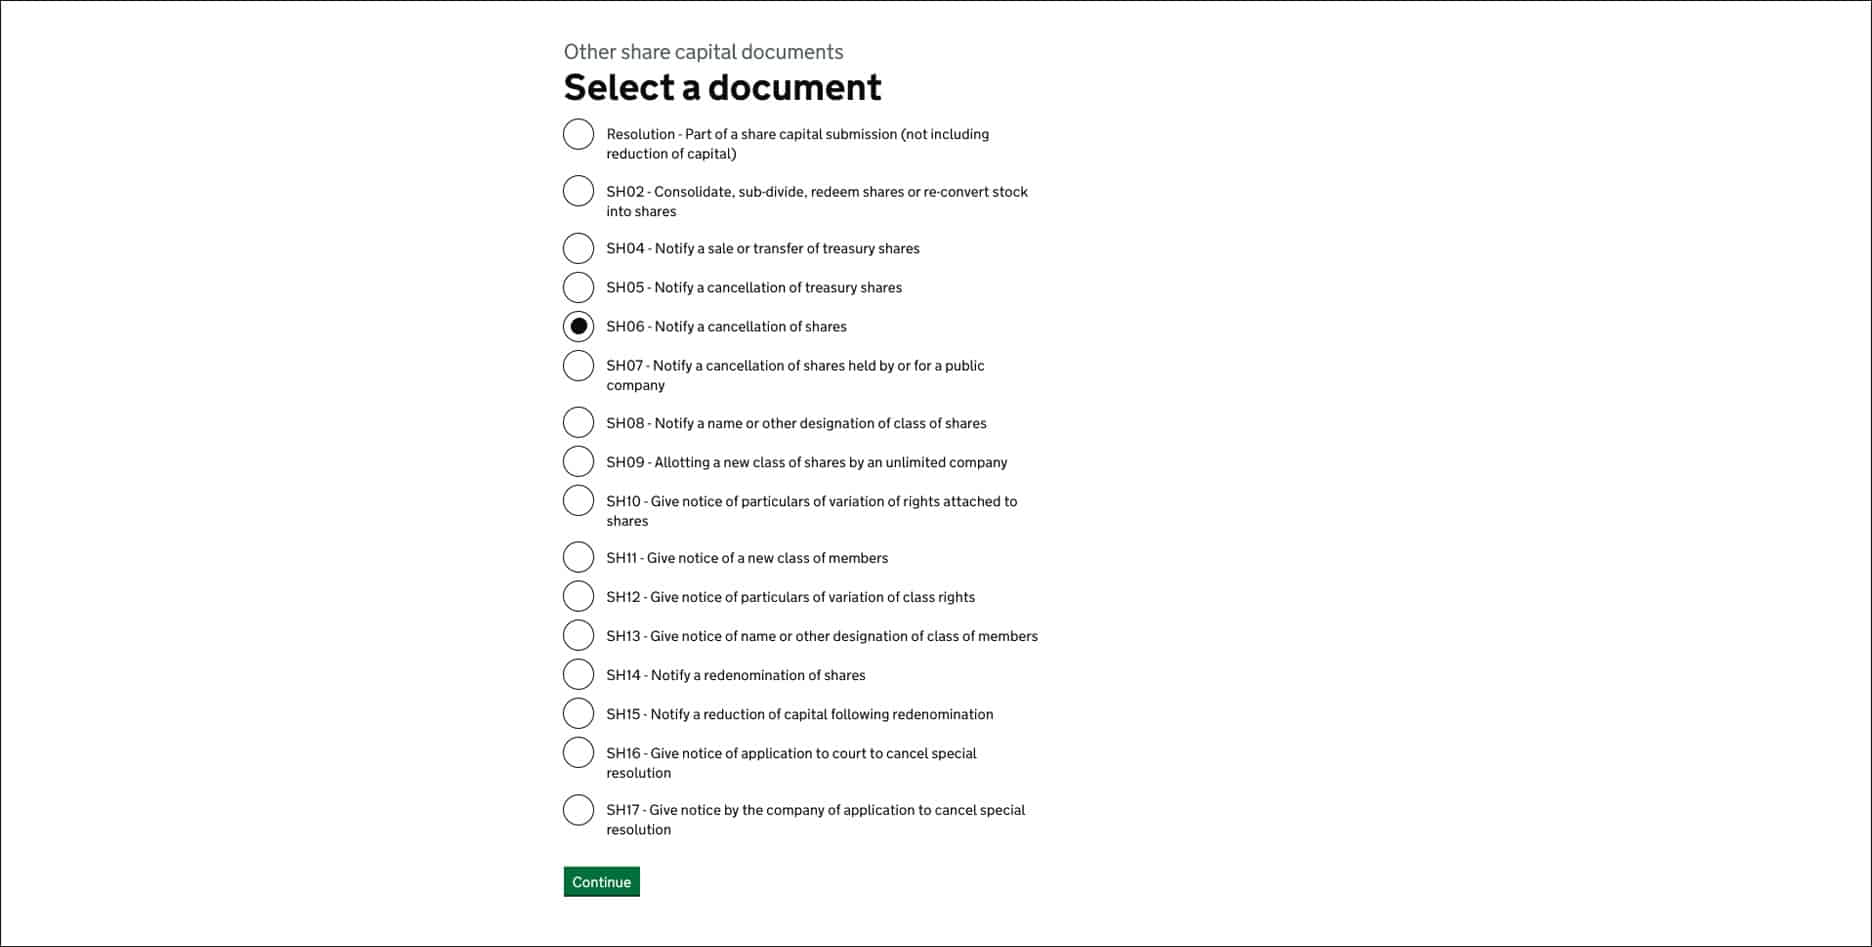 Select a document